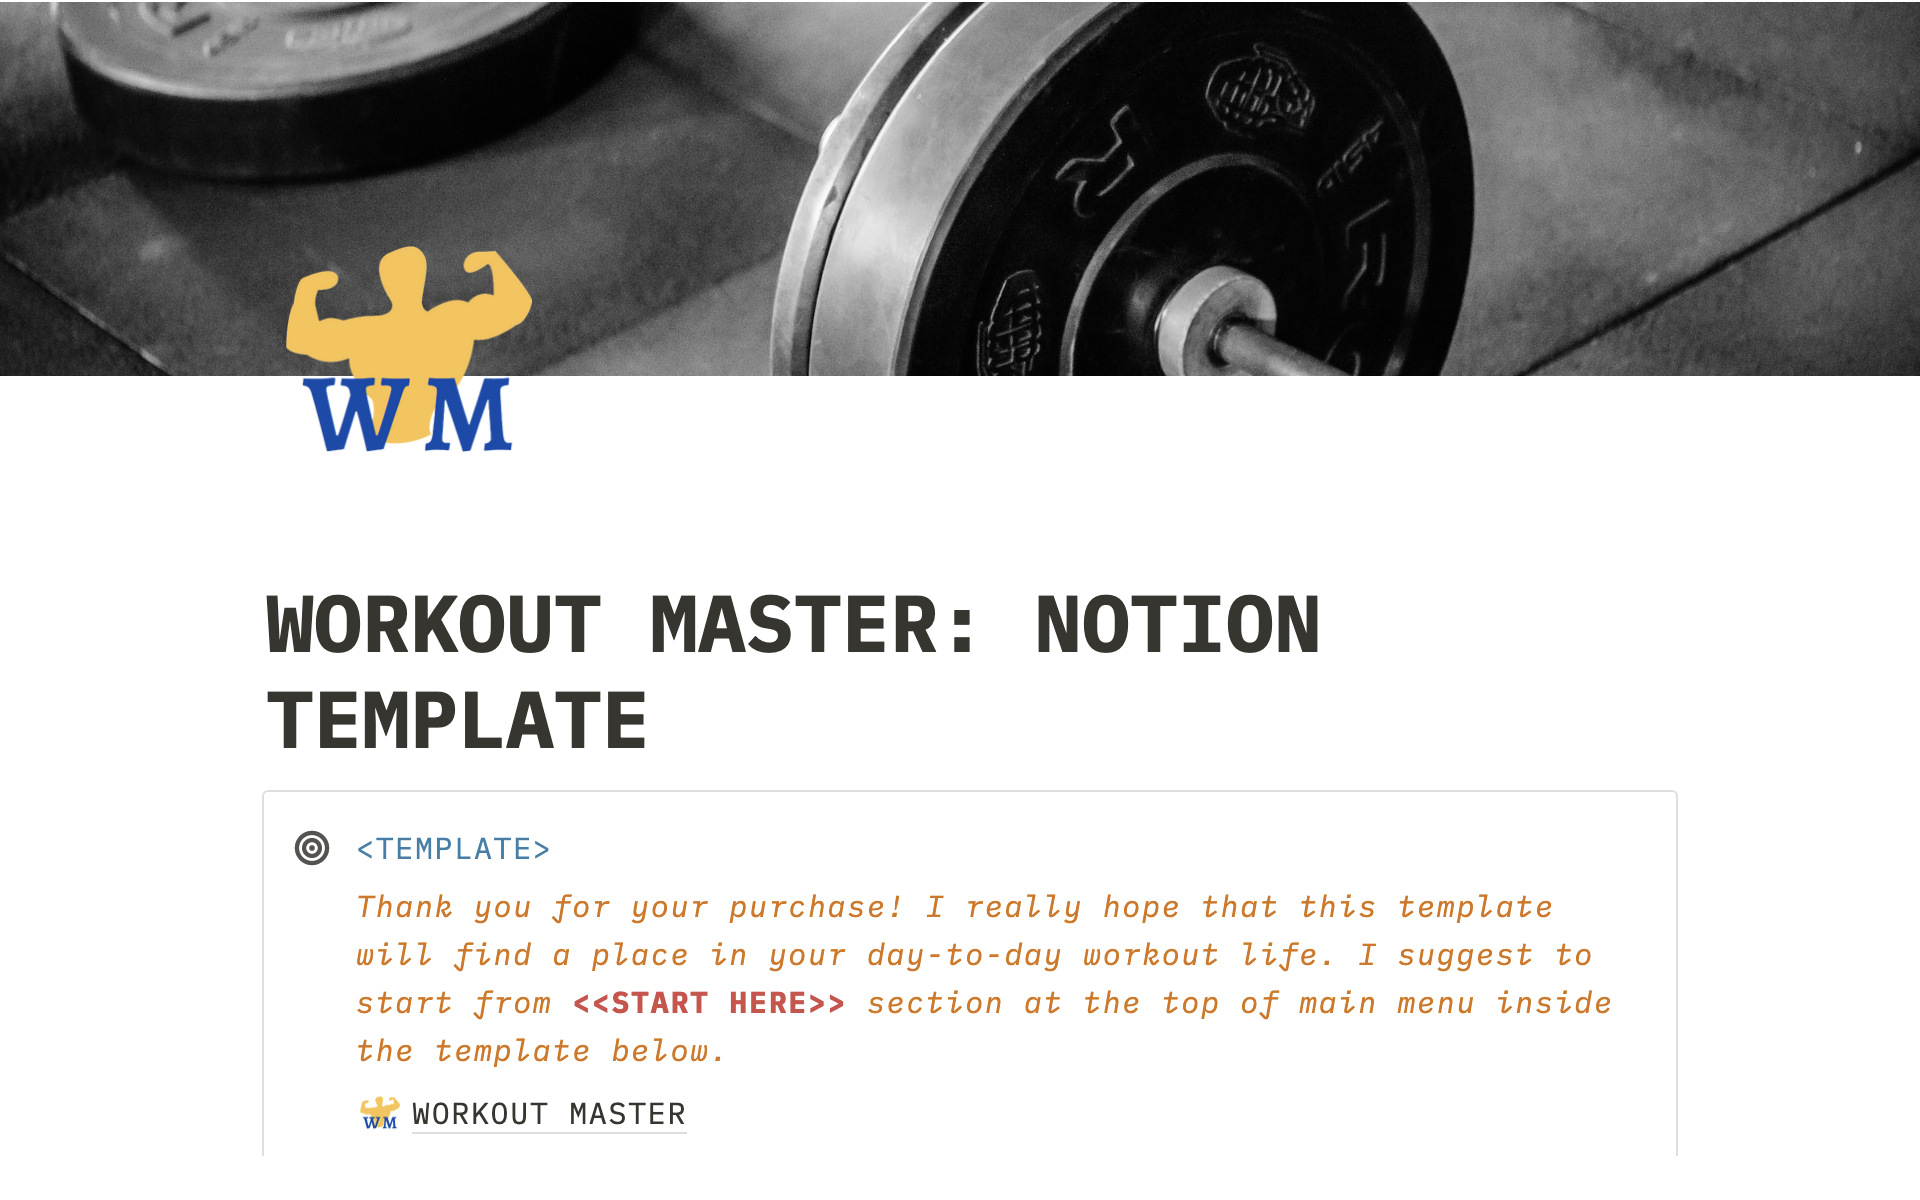 This Notion template will help you track and improve your workouts while you're actually doing them at the gym.